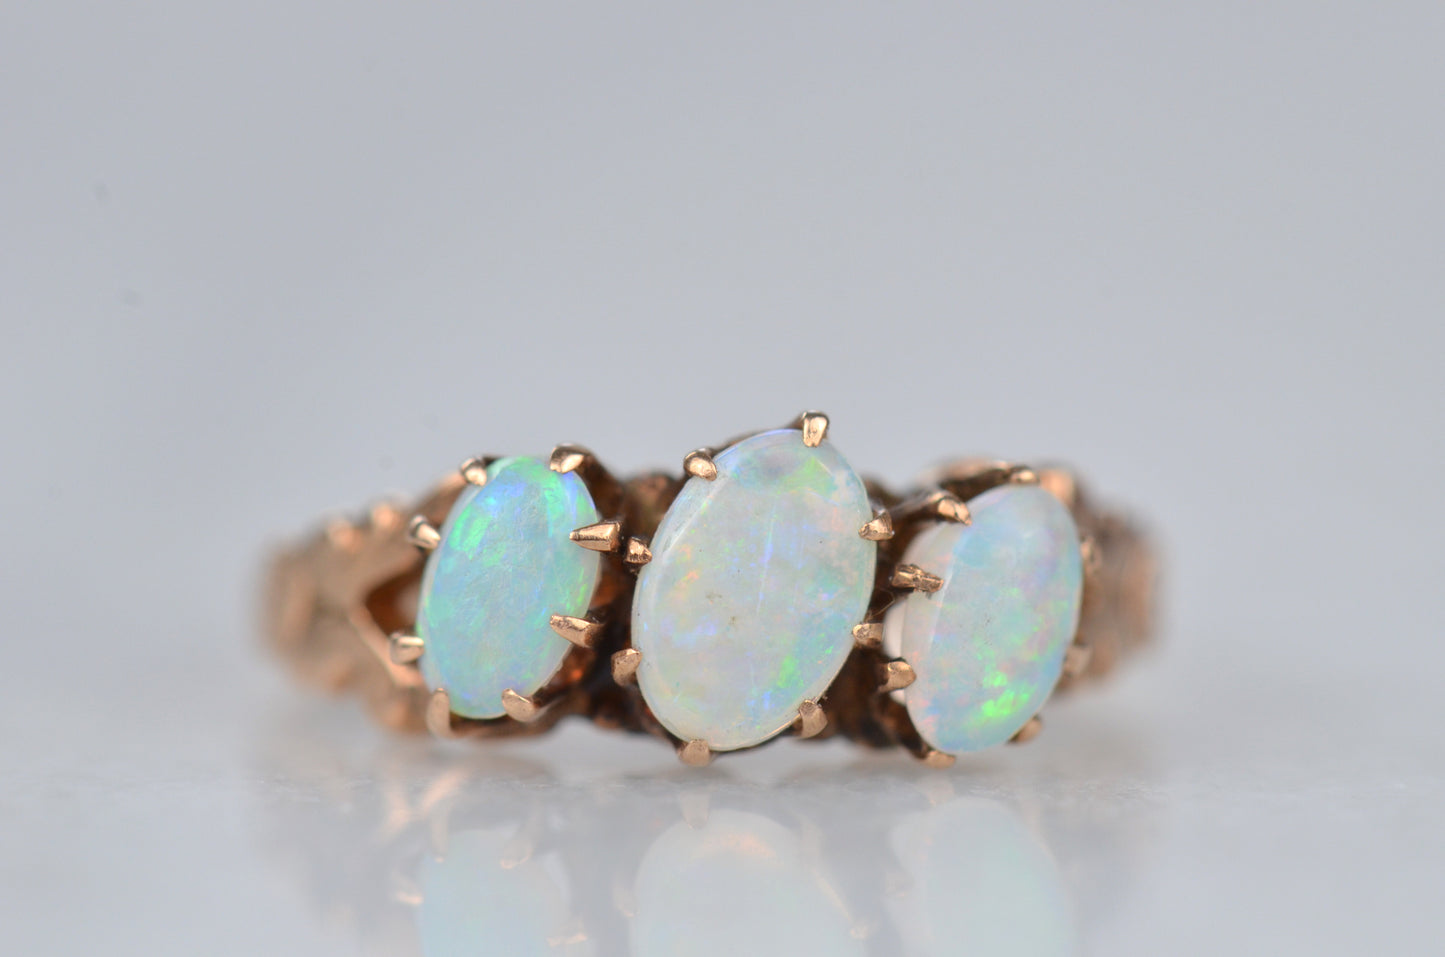 Dainty Victorian Opal Trilogy Ring